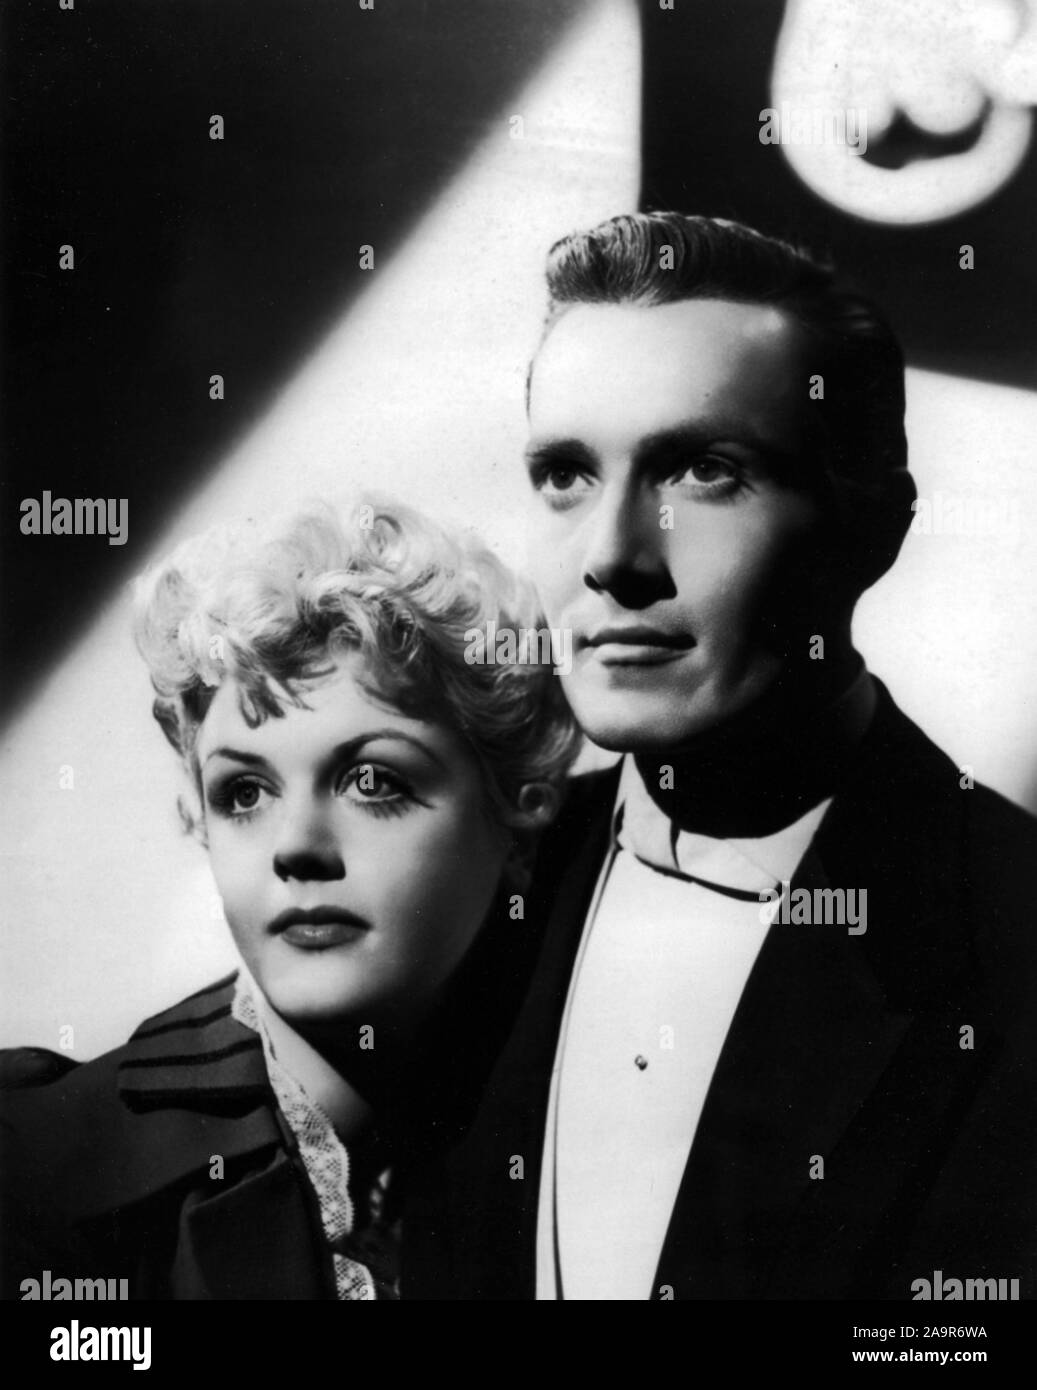 ANGELA LANSBURY and HURD HATFIELD in THE PICTURE OF DORIAN GRAY (1945), directed by ALBERT LEWIN. Credit: M.G.M / Album Stock Photo